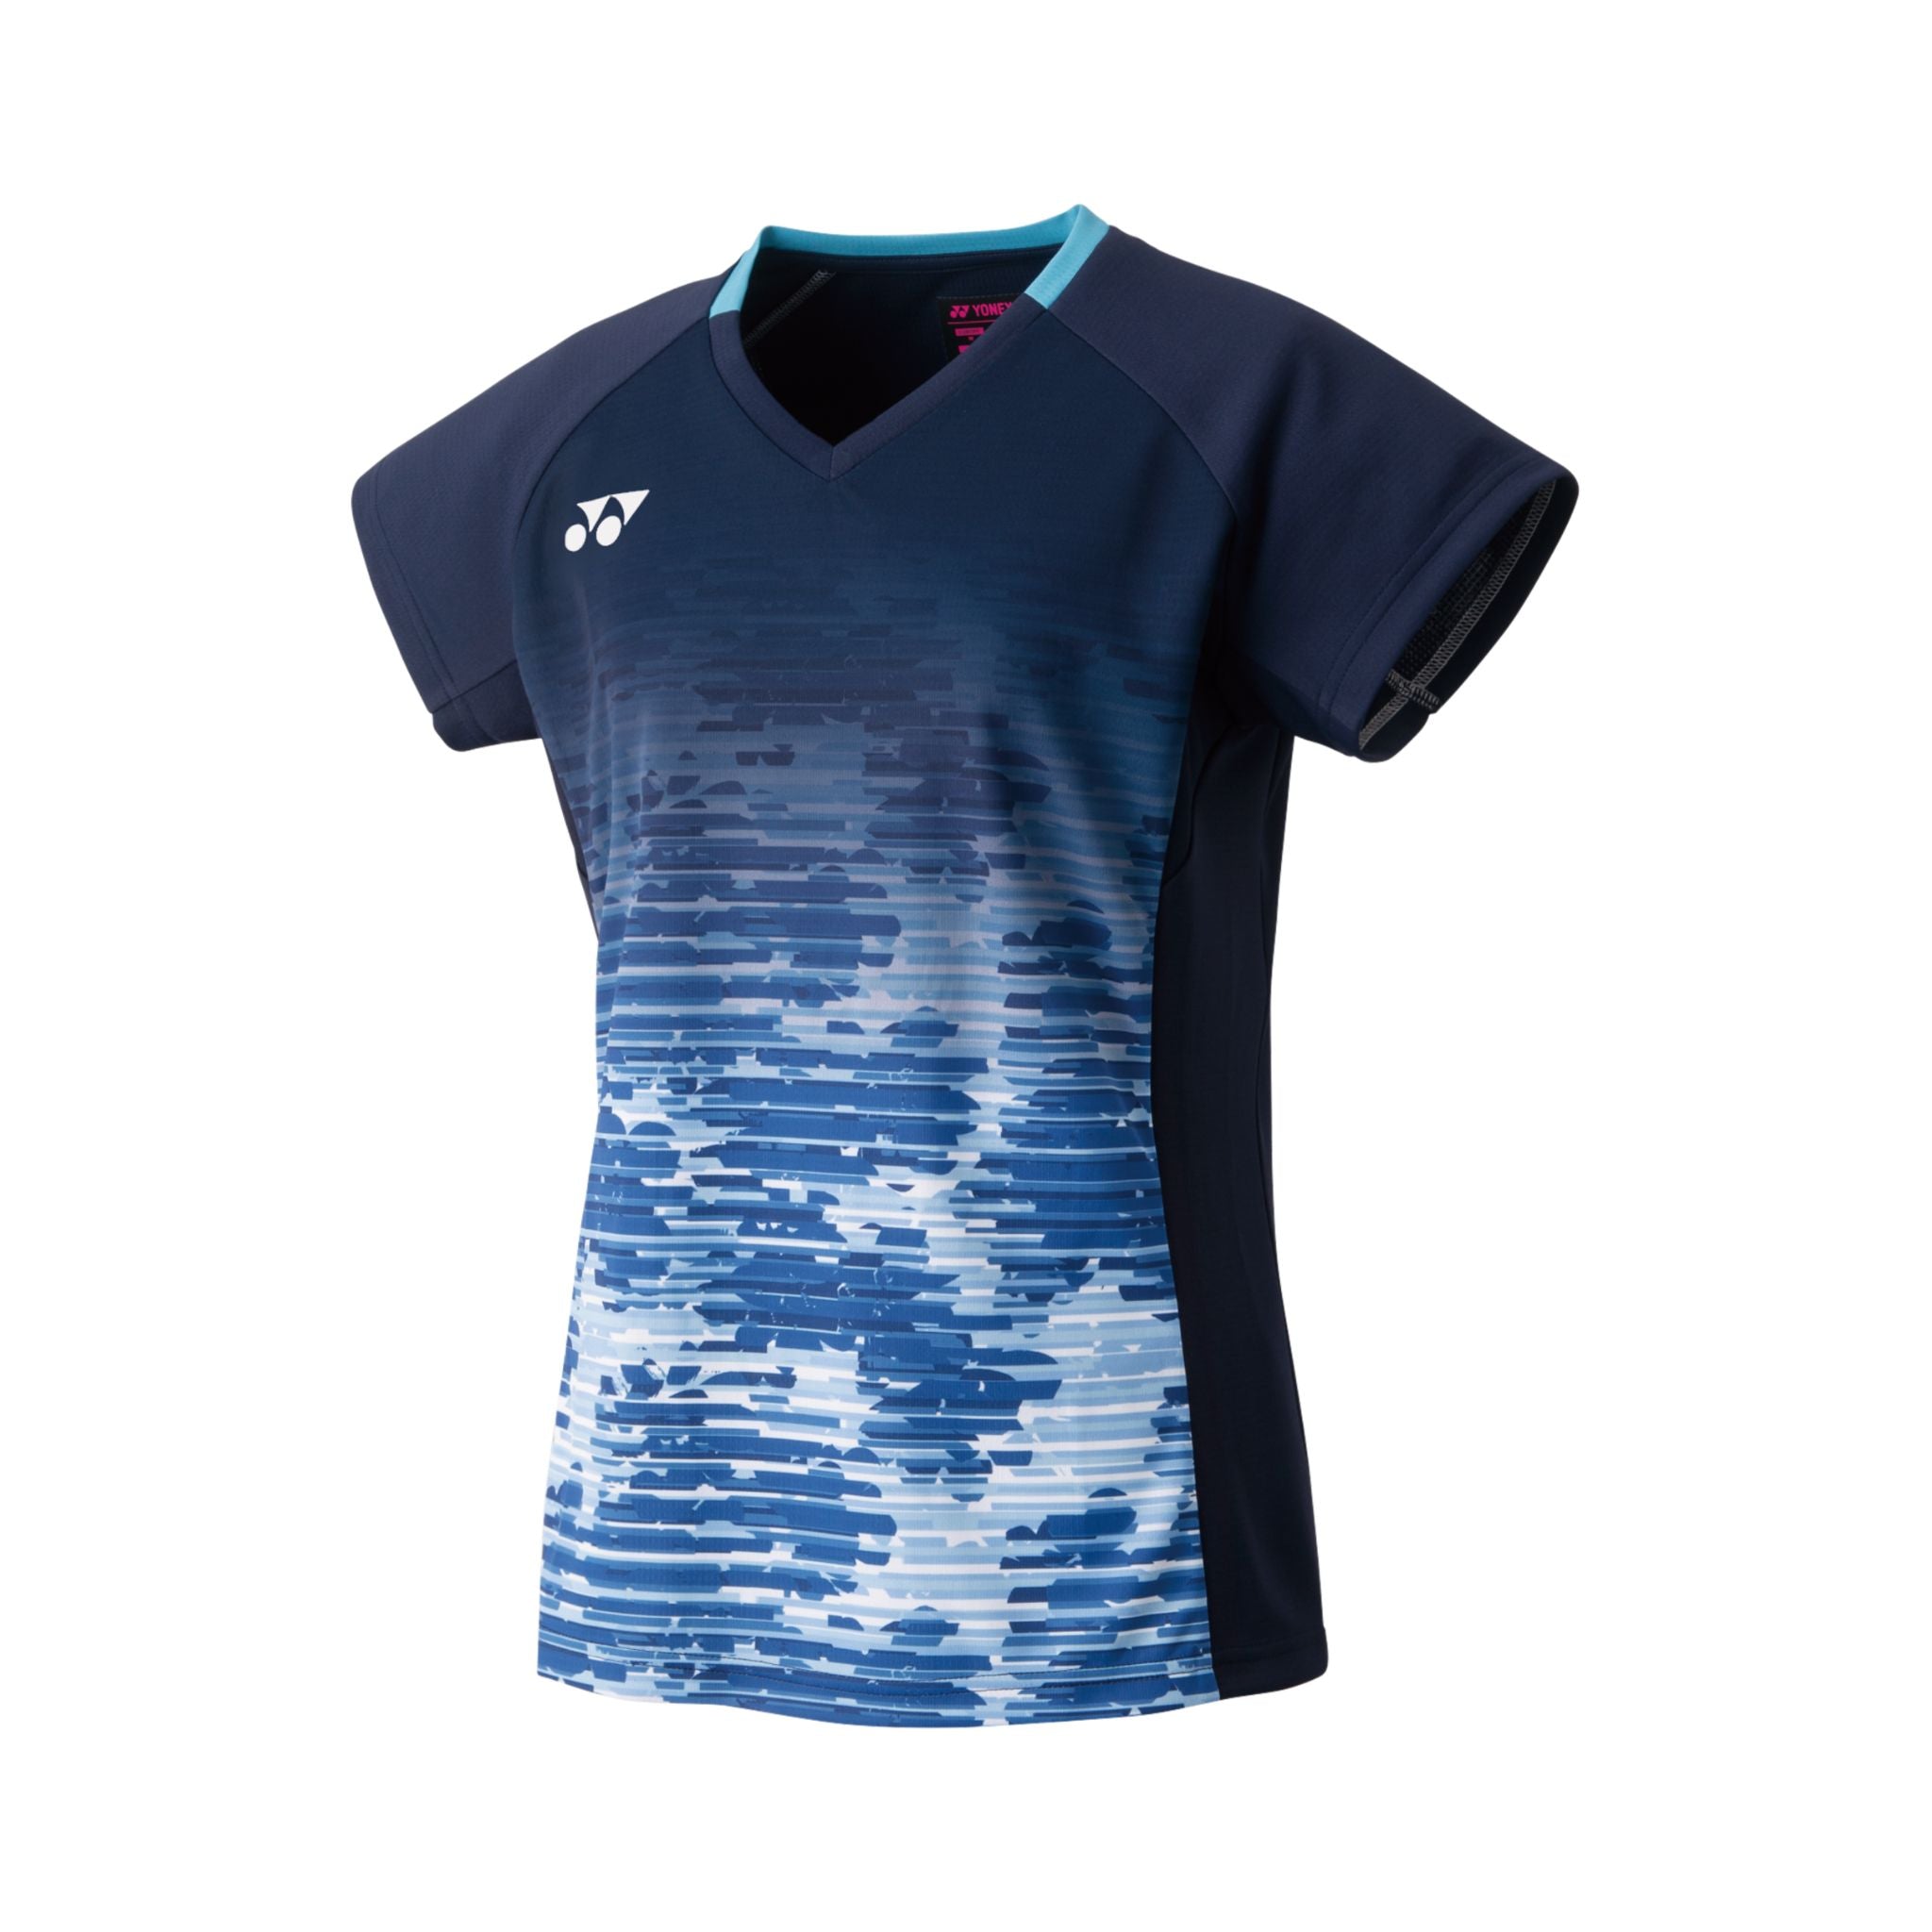 Navy Athletics on X: Check out Navy's brand new @UnderArmour